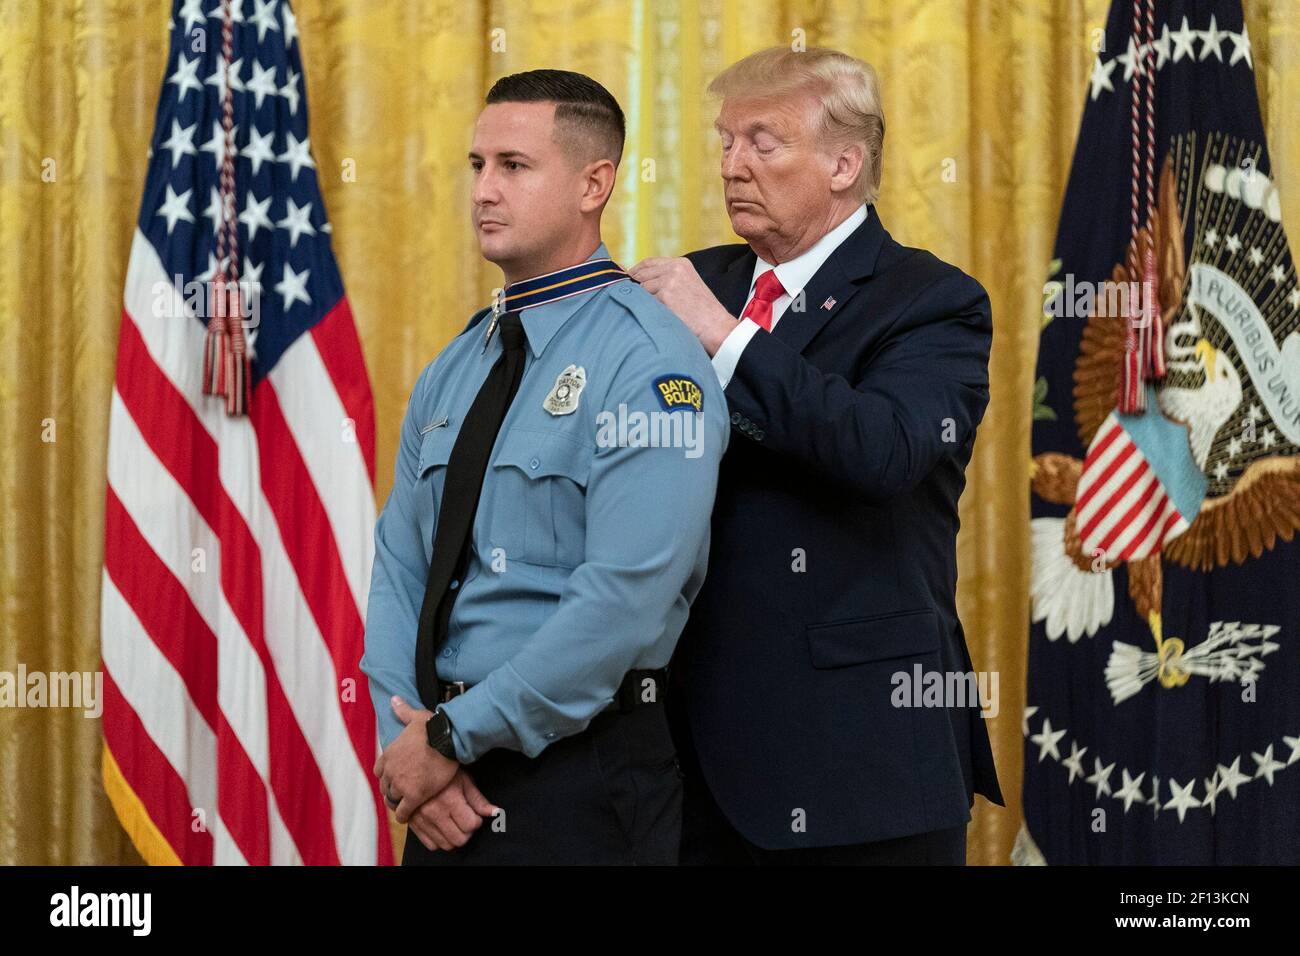 President Donald Trump presents the Medal of Valor to Officer Jeremy Campbell during the Medal of Valor and Heroic Commendations Ceremony Monday Sep. 9 2019 in the East Room of the White House. Stock Photo